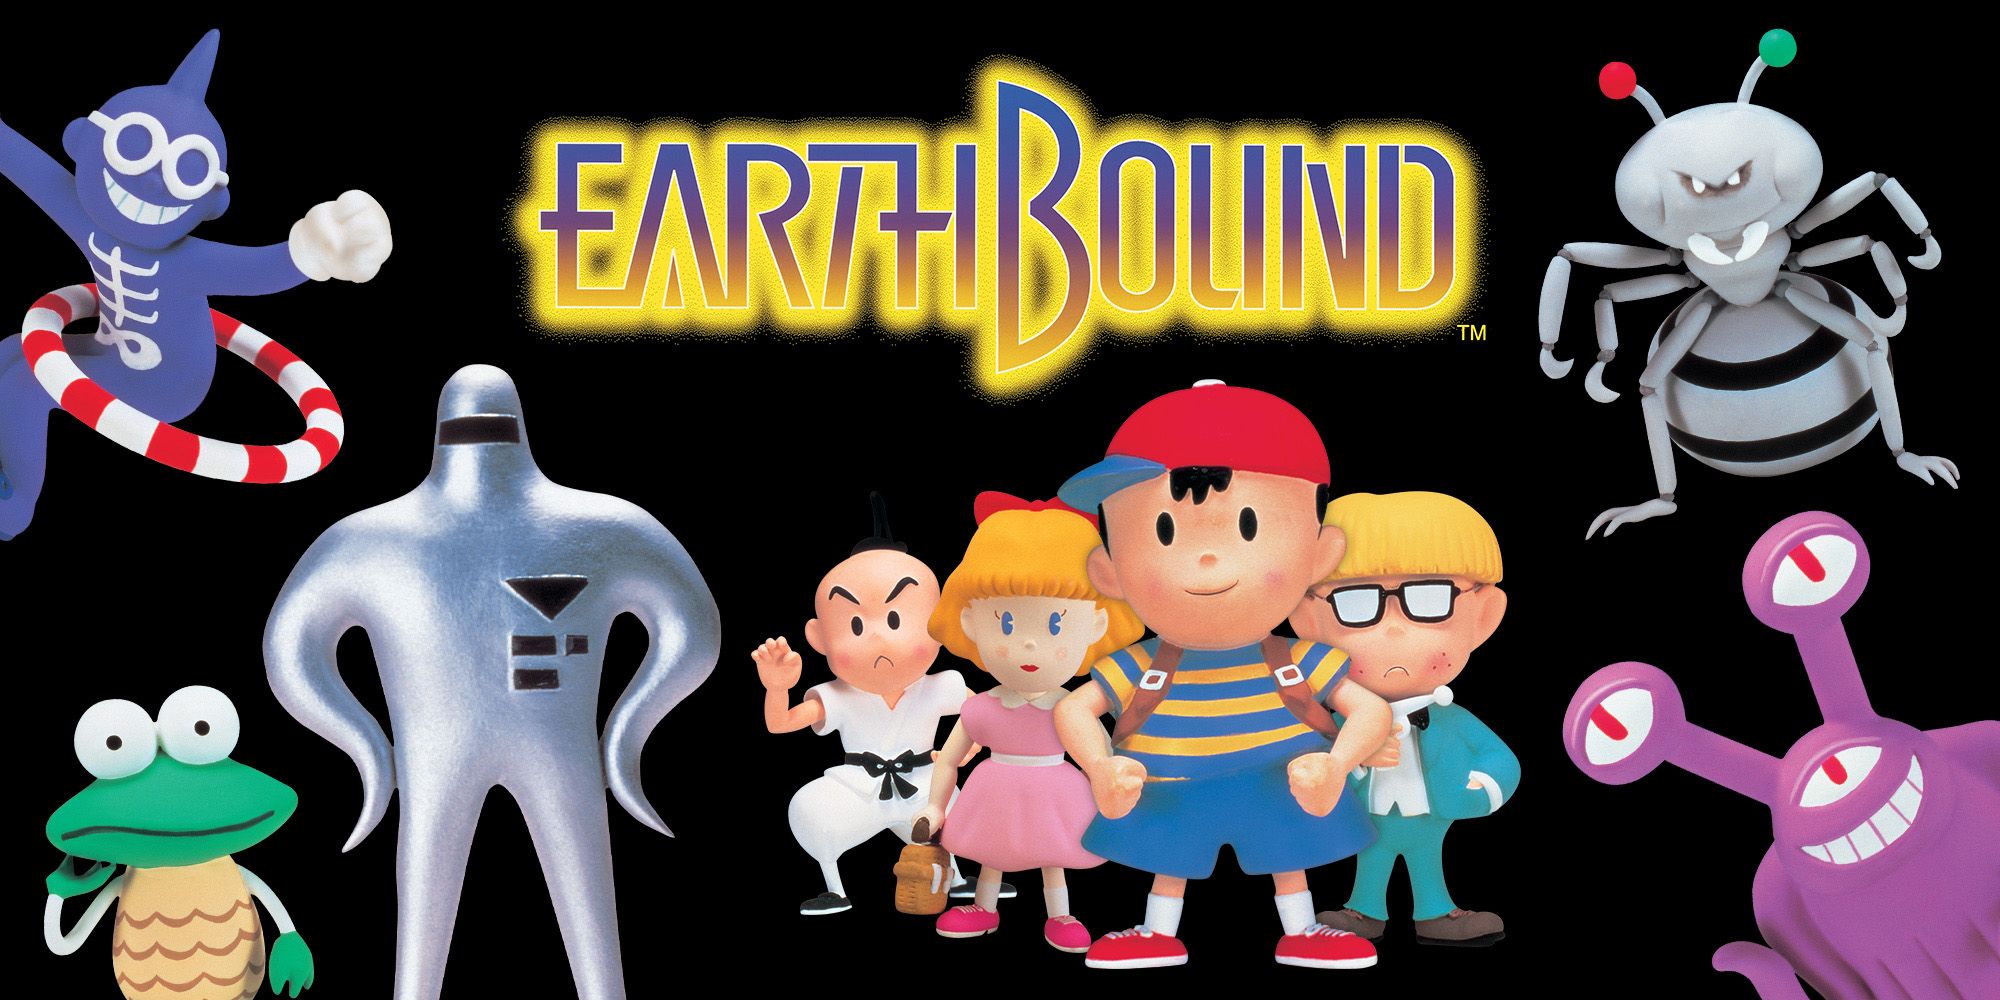 Earthbound Cover Art featuring Ness, Jeff Andonuts, Paula Polestar, and Poo